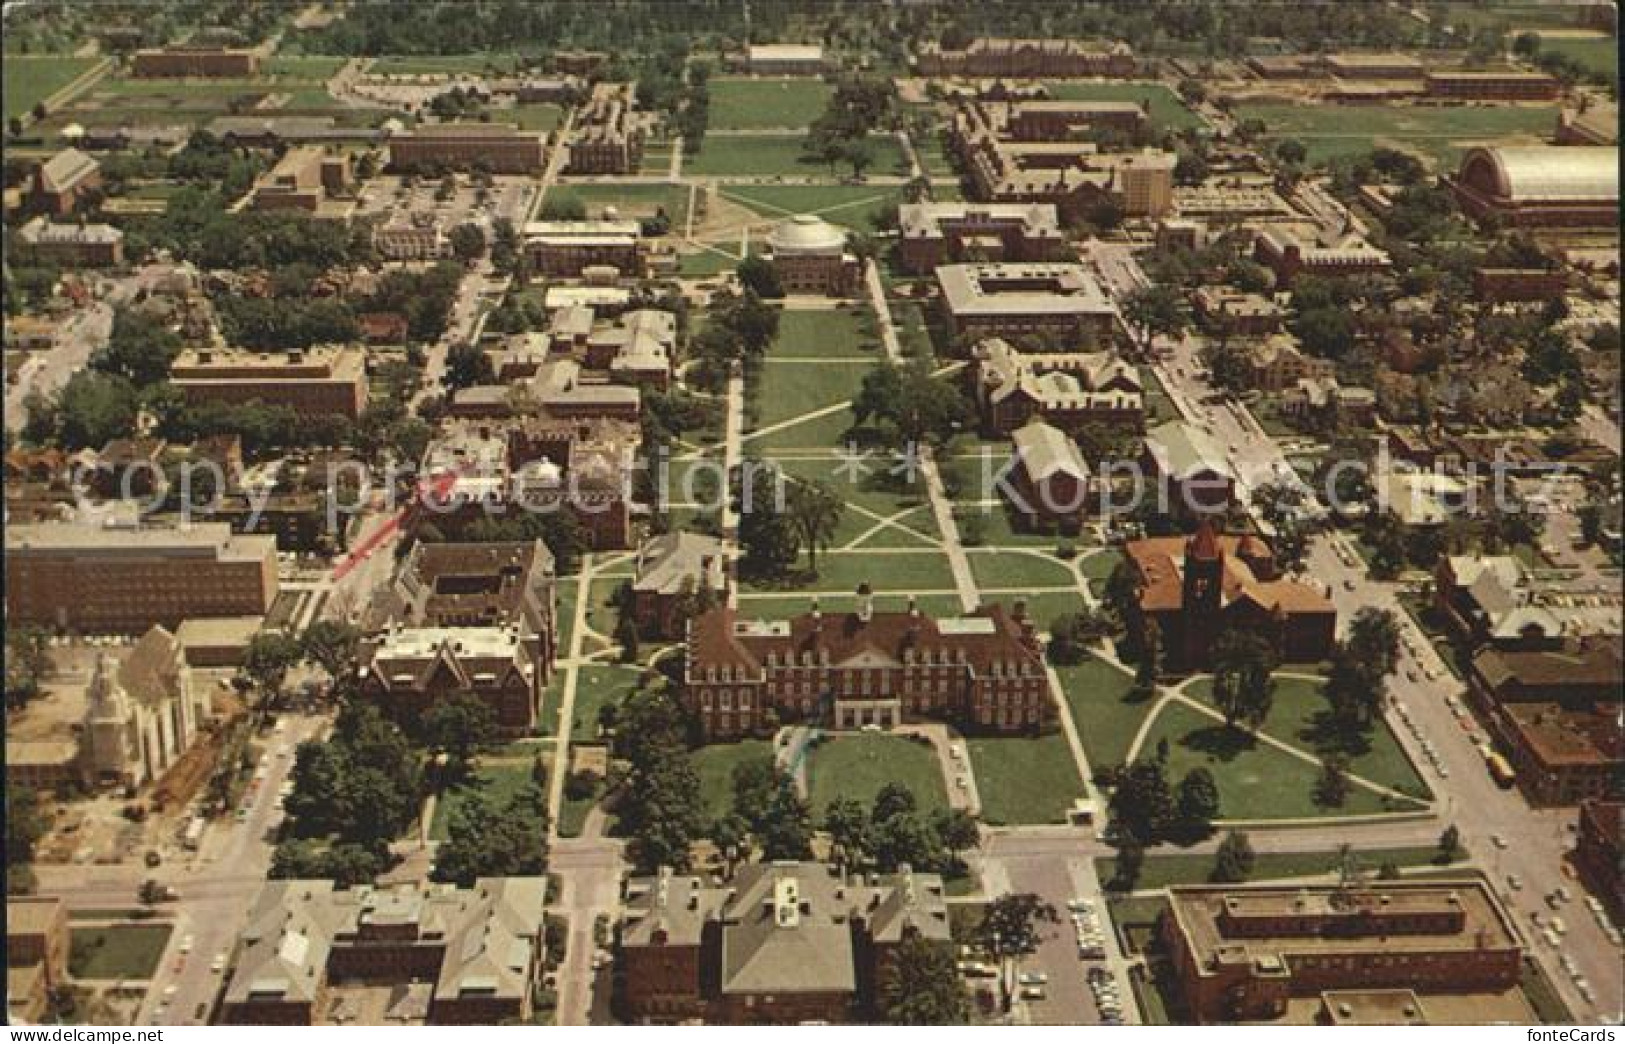 71940925 Champaign Airview Of Campus University Of Illinois - Andere & Zonder Classificatie